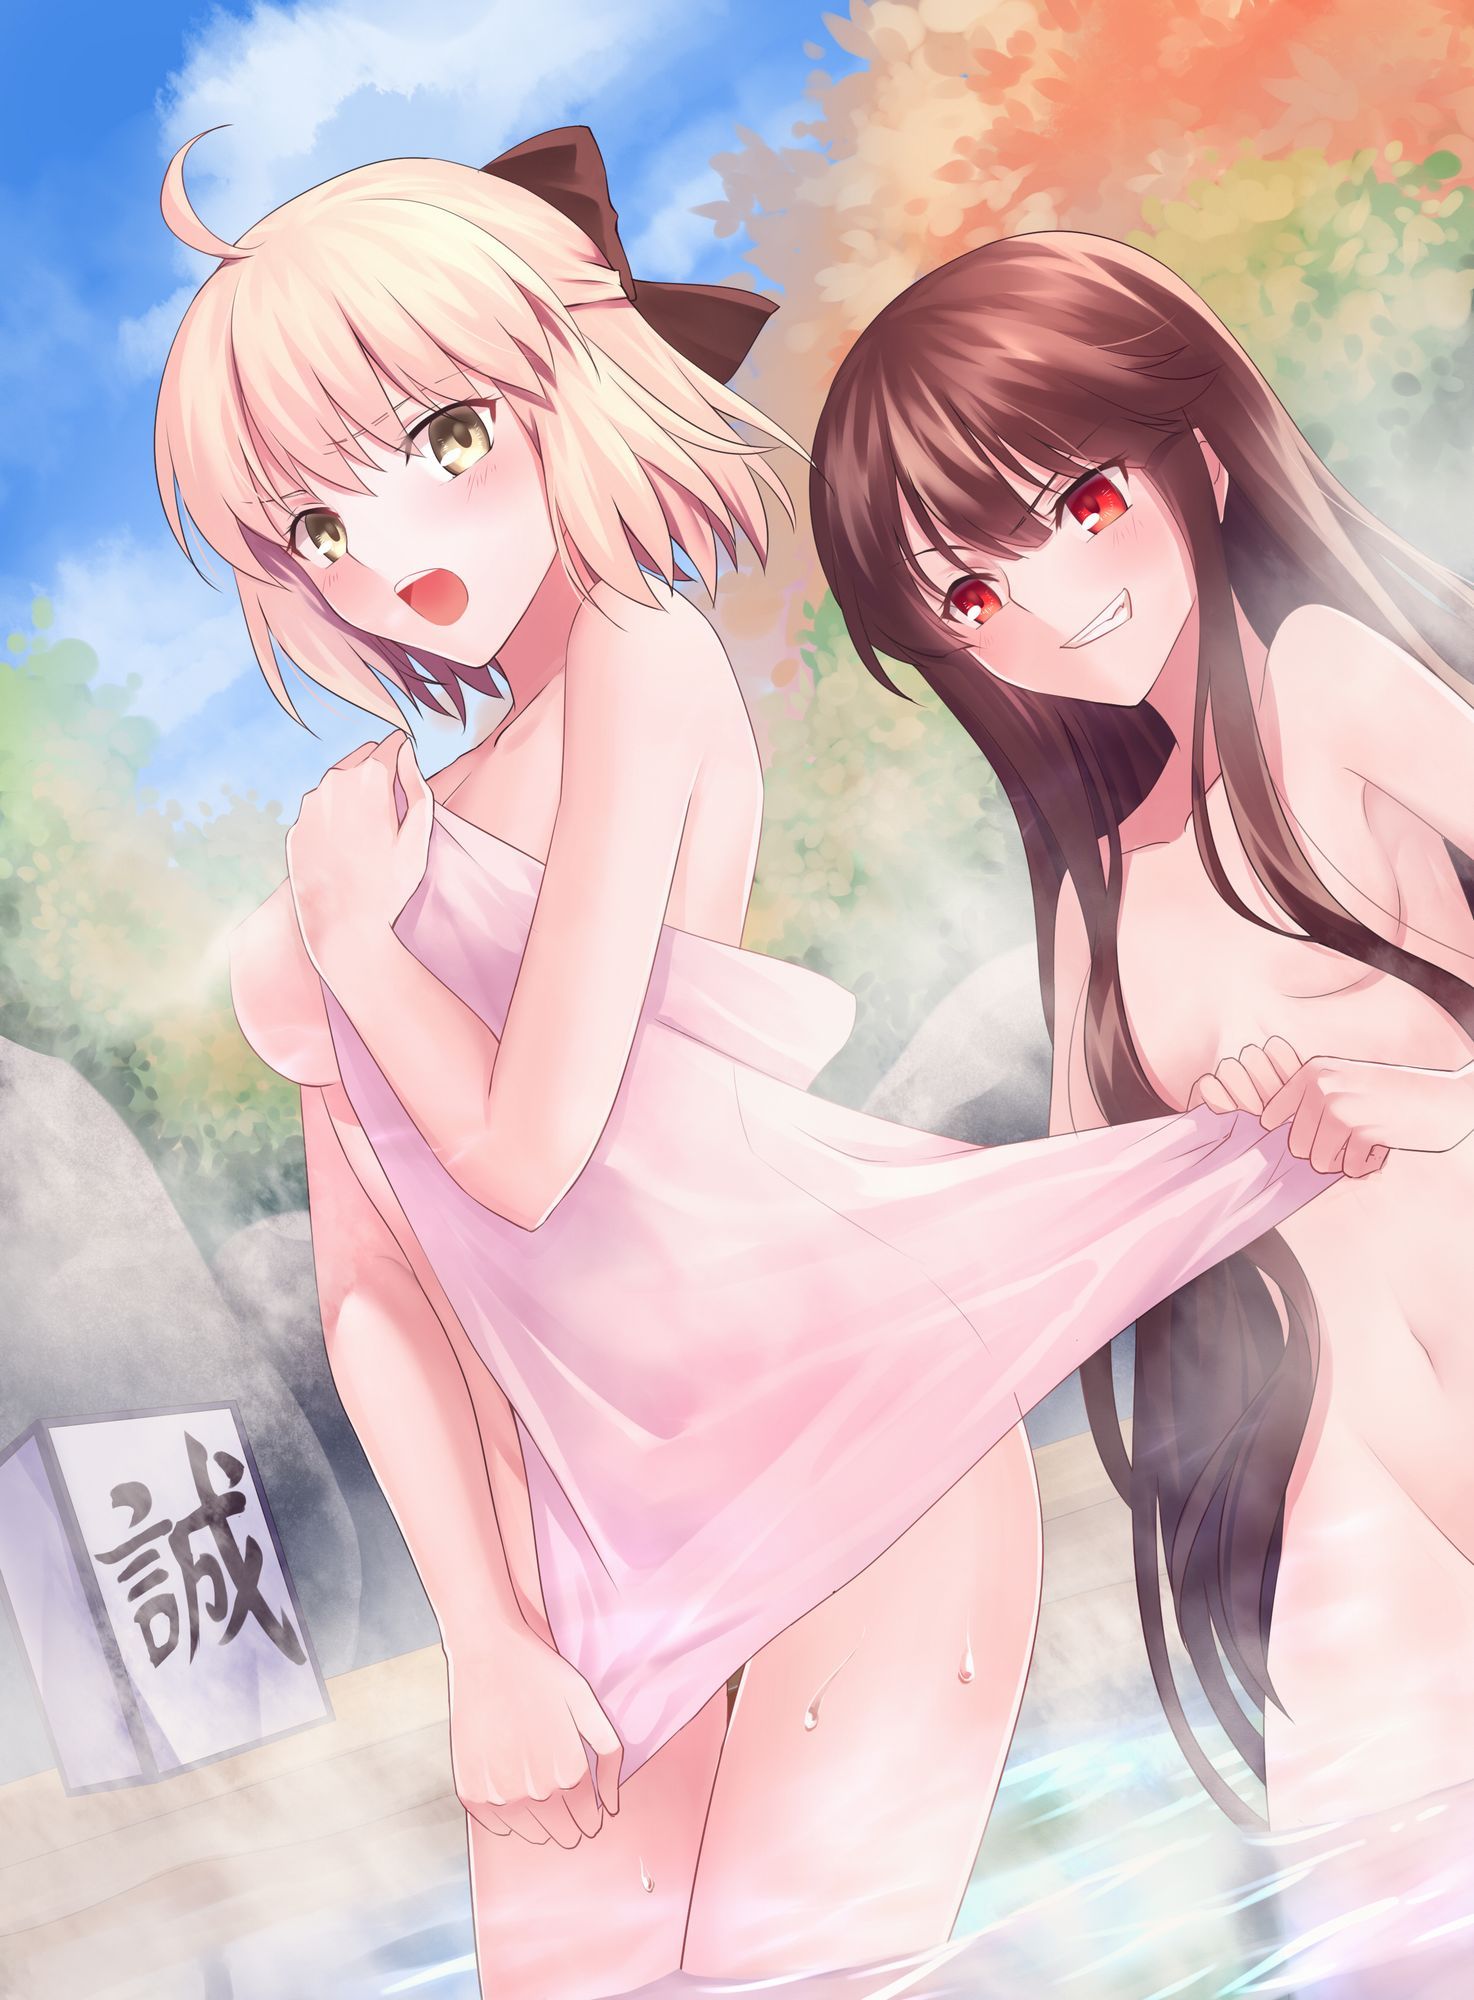 Erotic anime summary Beautiful girls relaxing in baths and hot springs [secondary erotic] 10